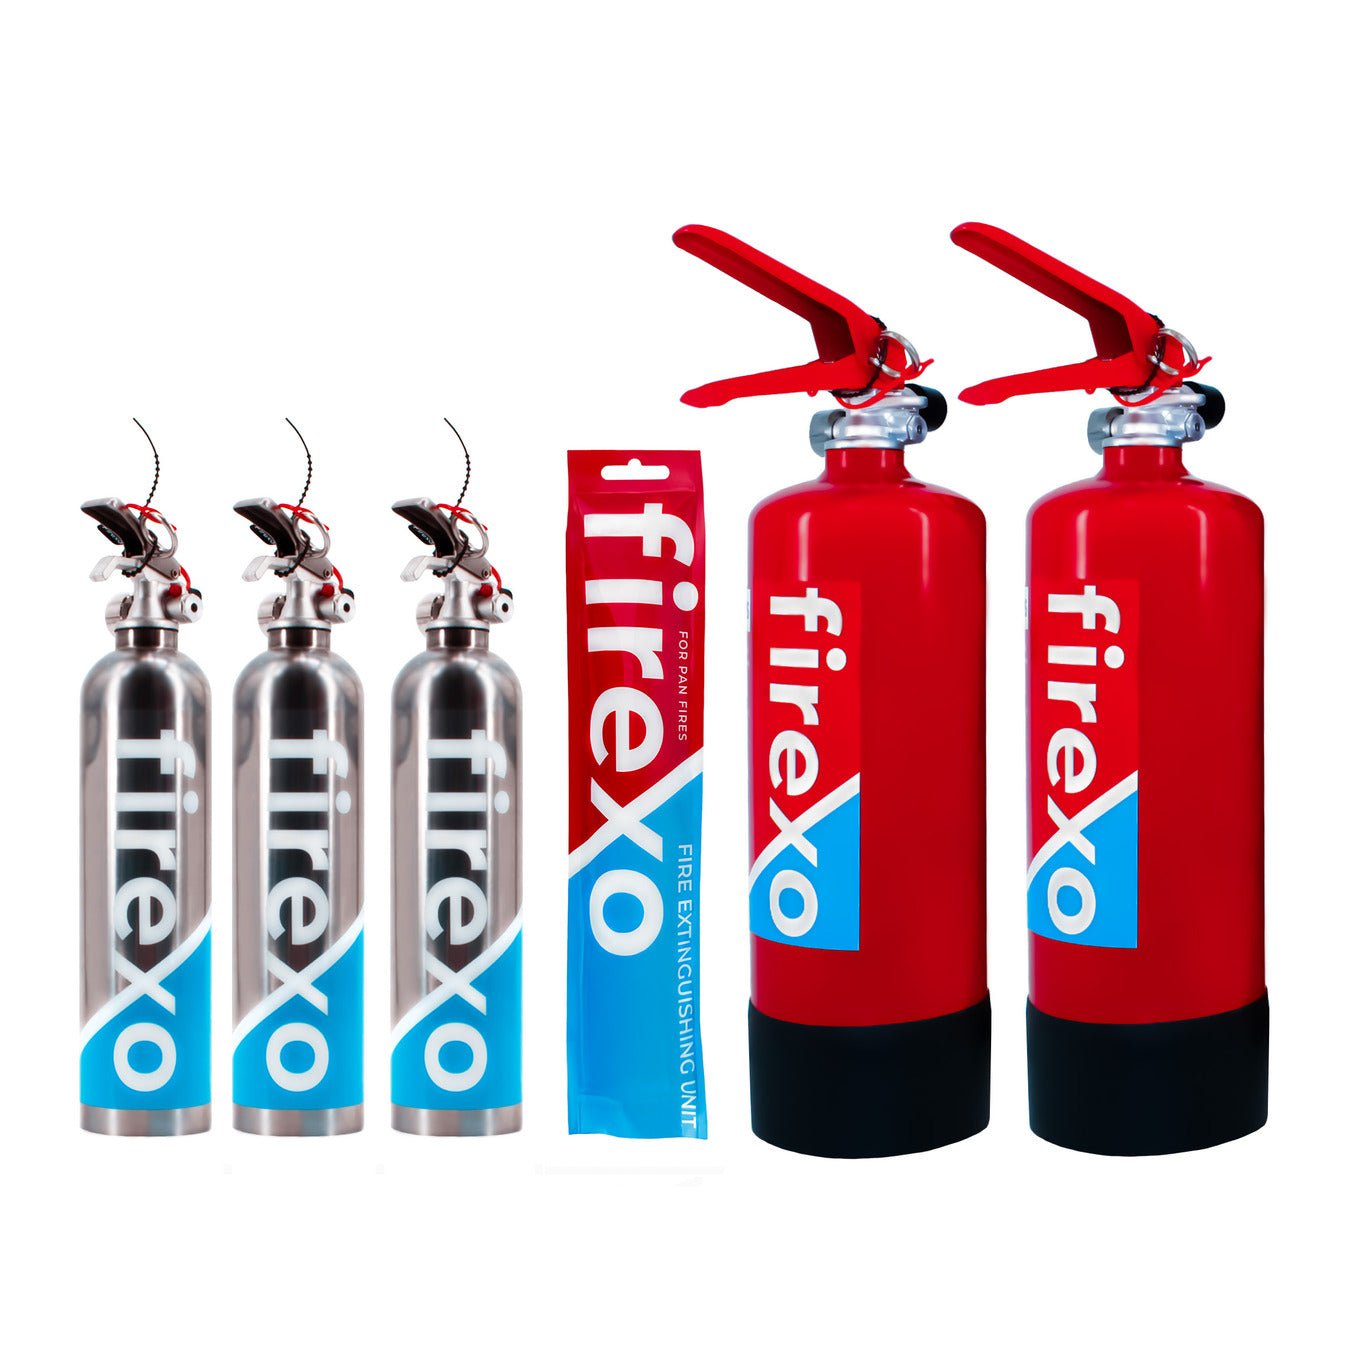 Firexo Small Office Fire Extinguisher Pack. (6 Items)